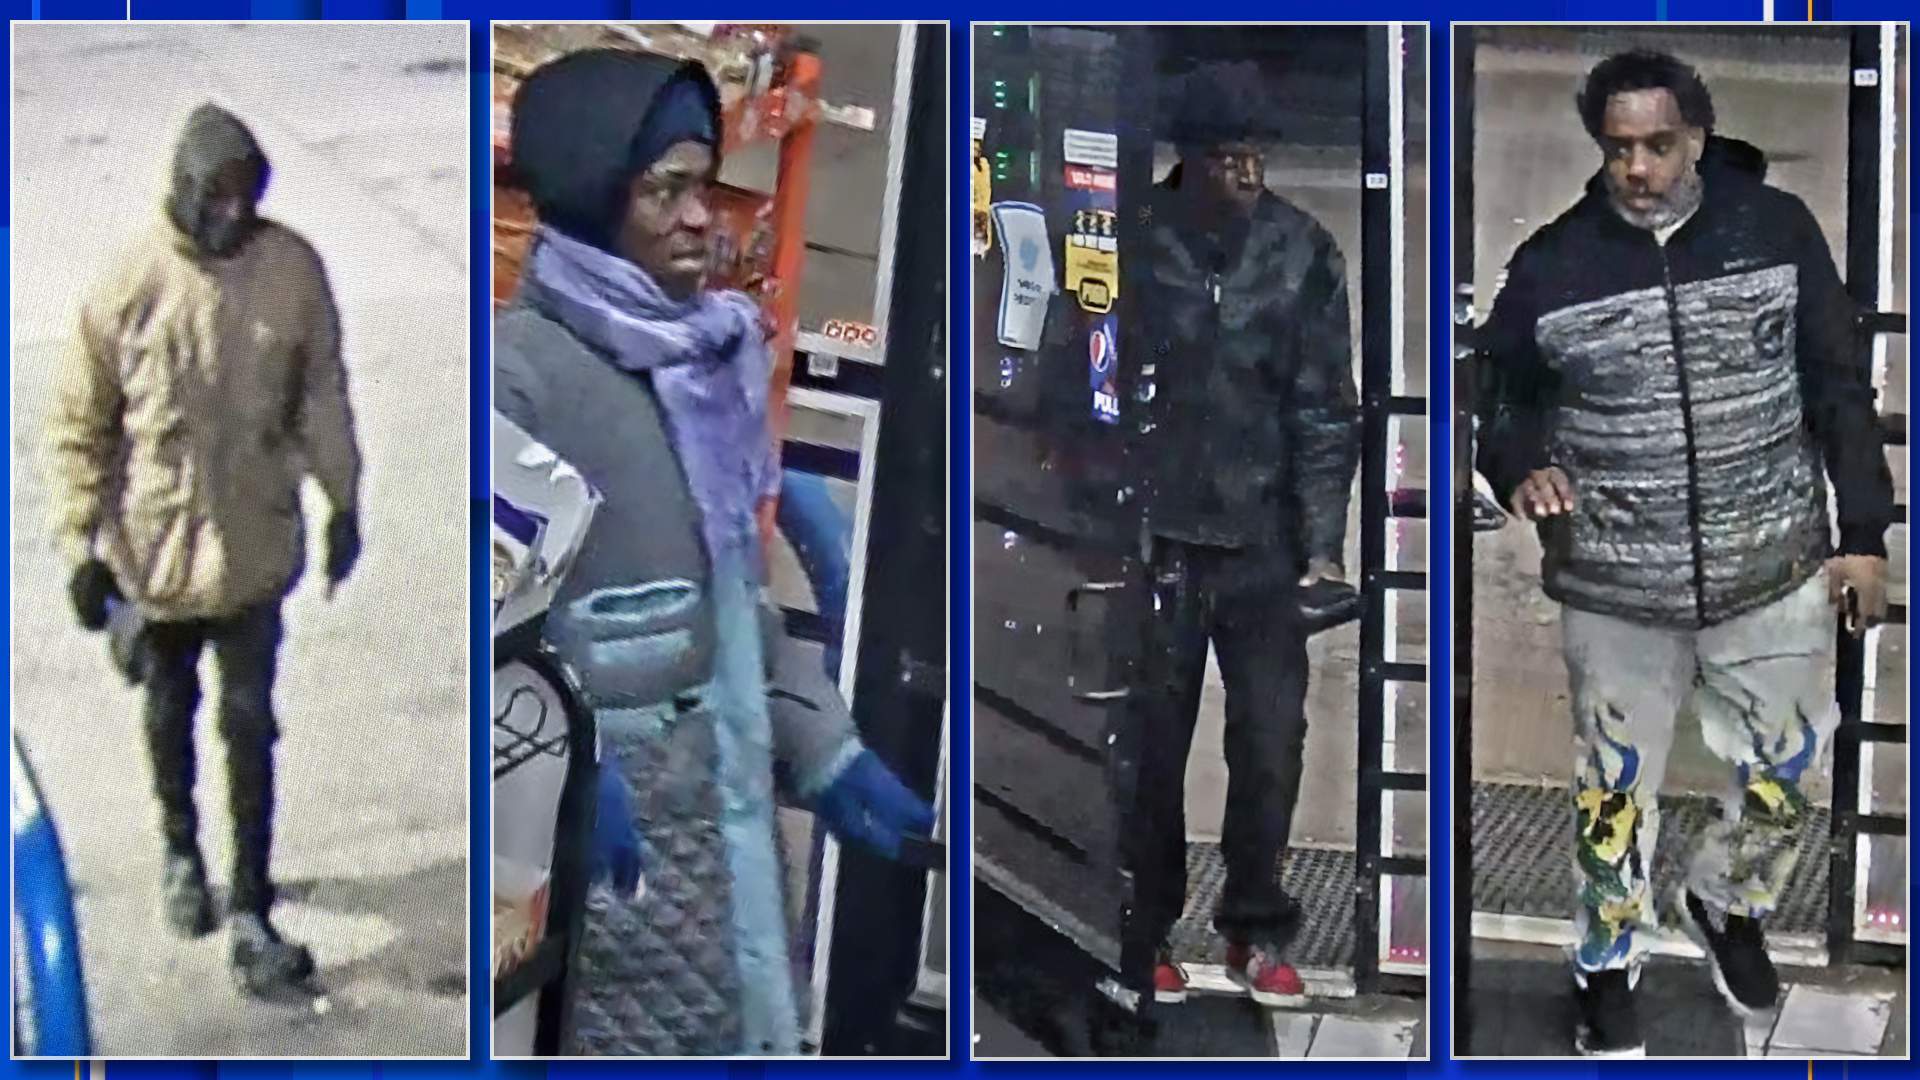 Police seek 4 in connection with violent carjacking on Detroit’s west side